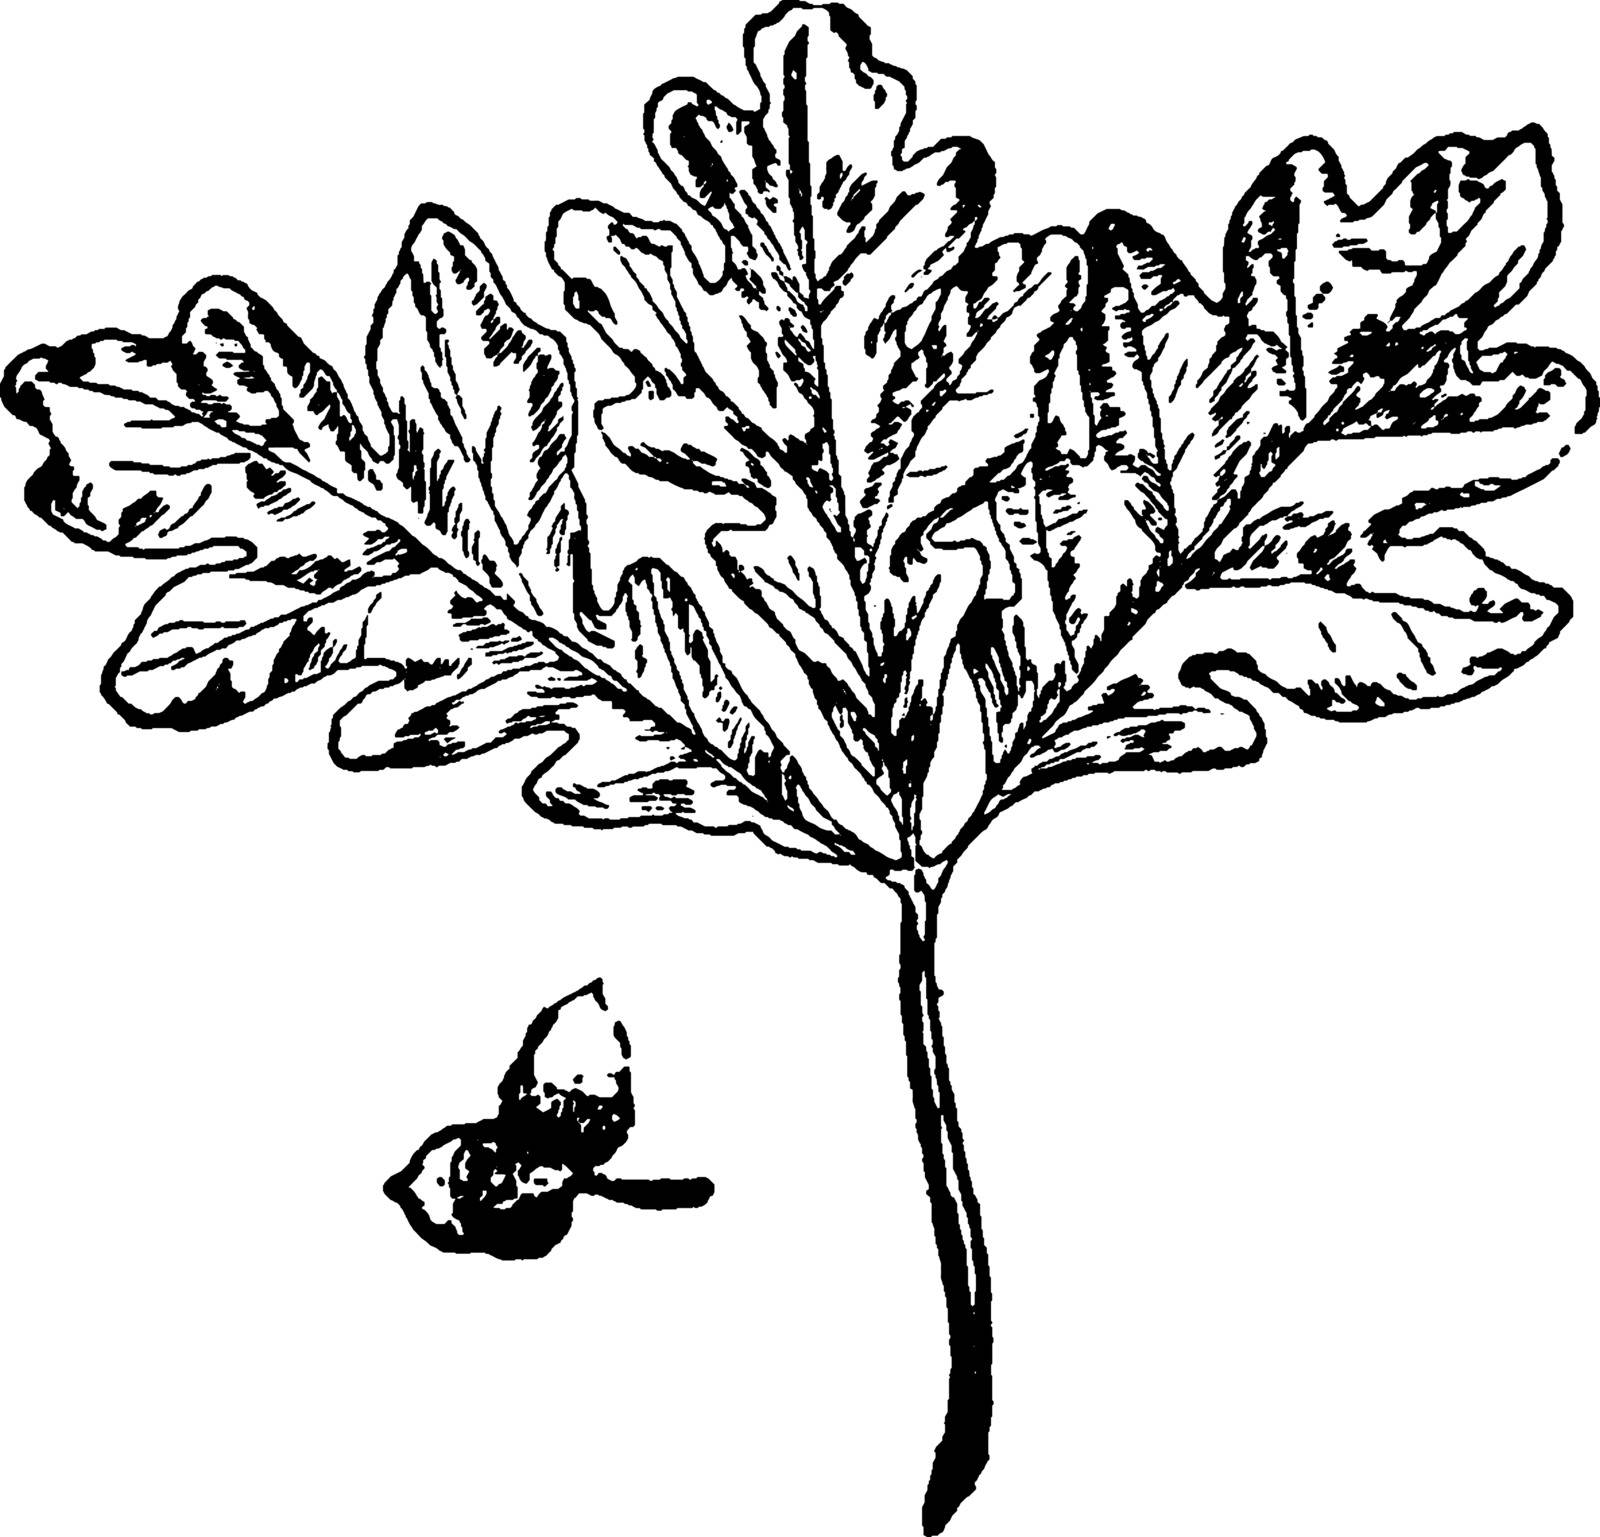 This is an image of White Oak Leaf. It is the most important timber tree of the White Oak group. It is used for railroad ties, flooring, barrels, furniture, and many other uses, vintage line drawing or engraving illustration.